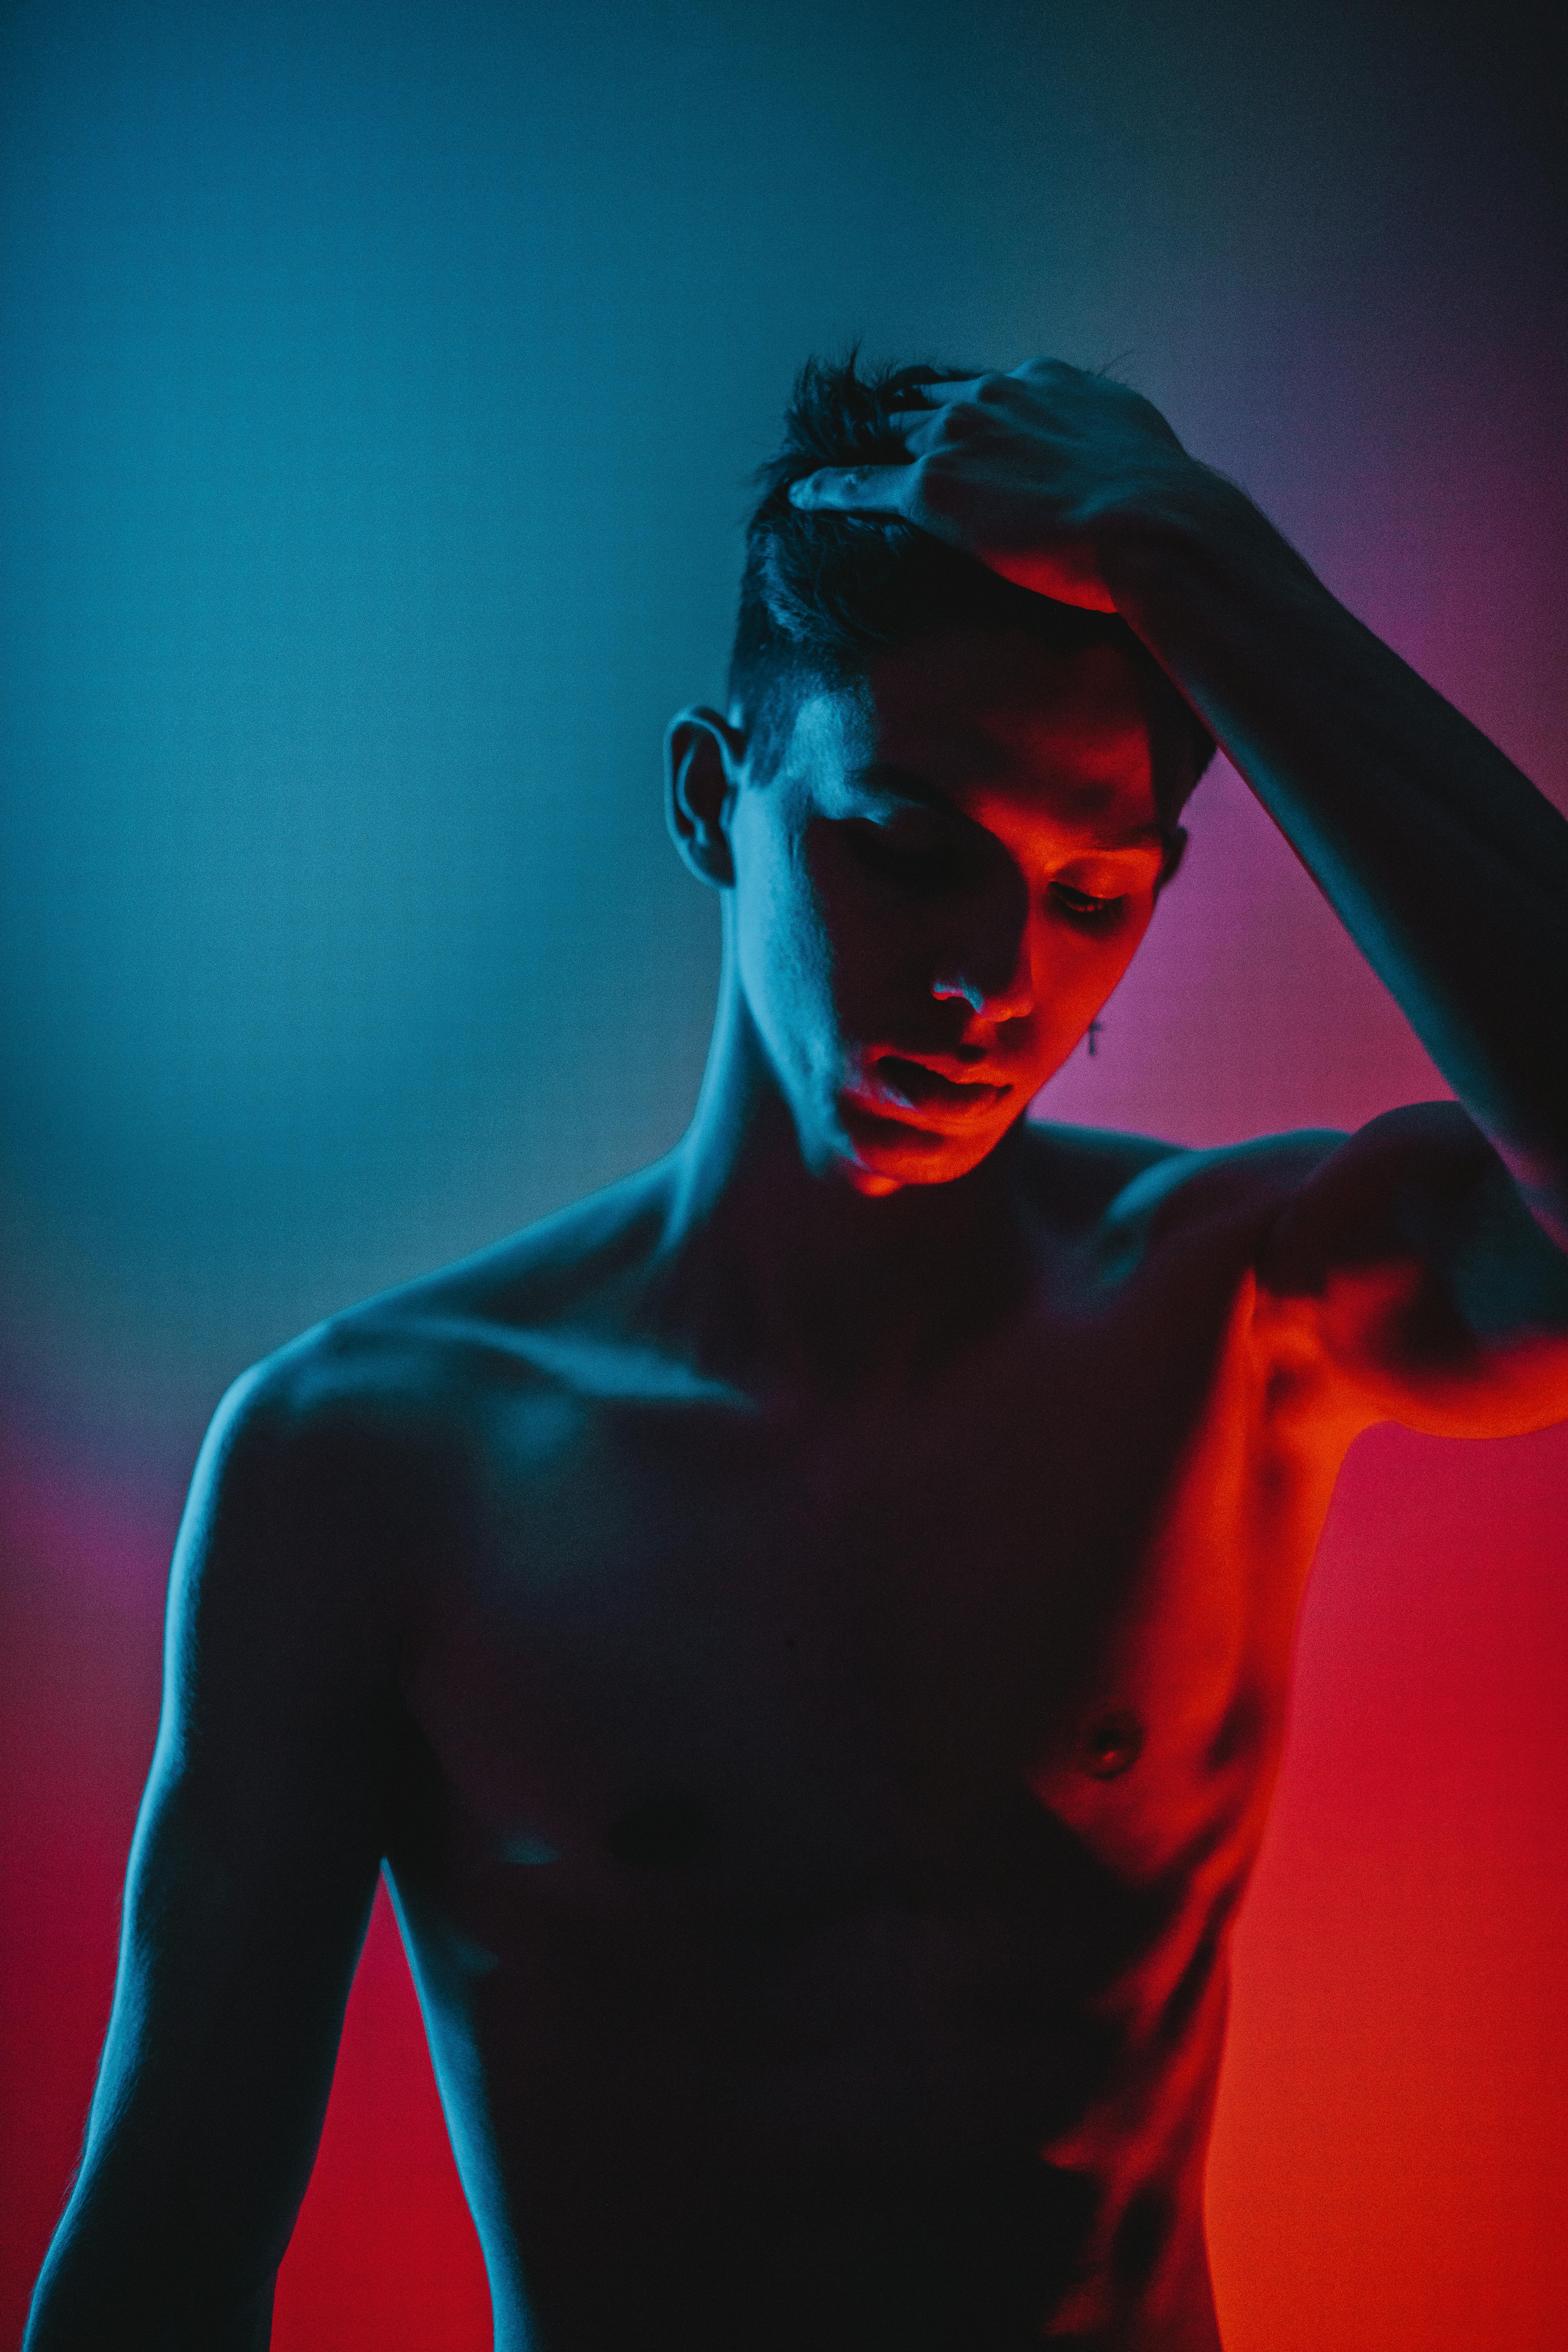 fit shirtless man touching hair and standing in neon lights